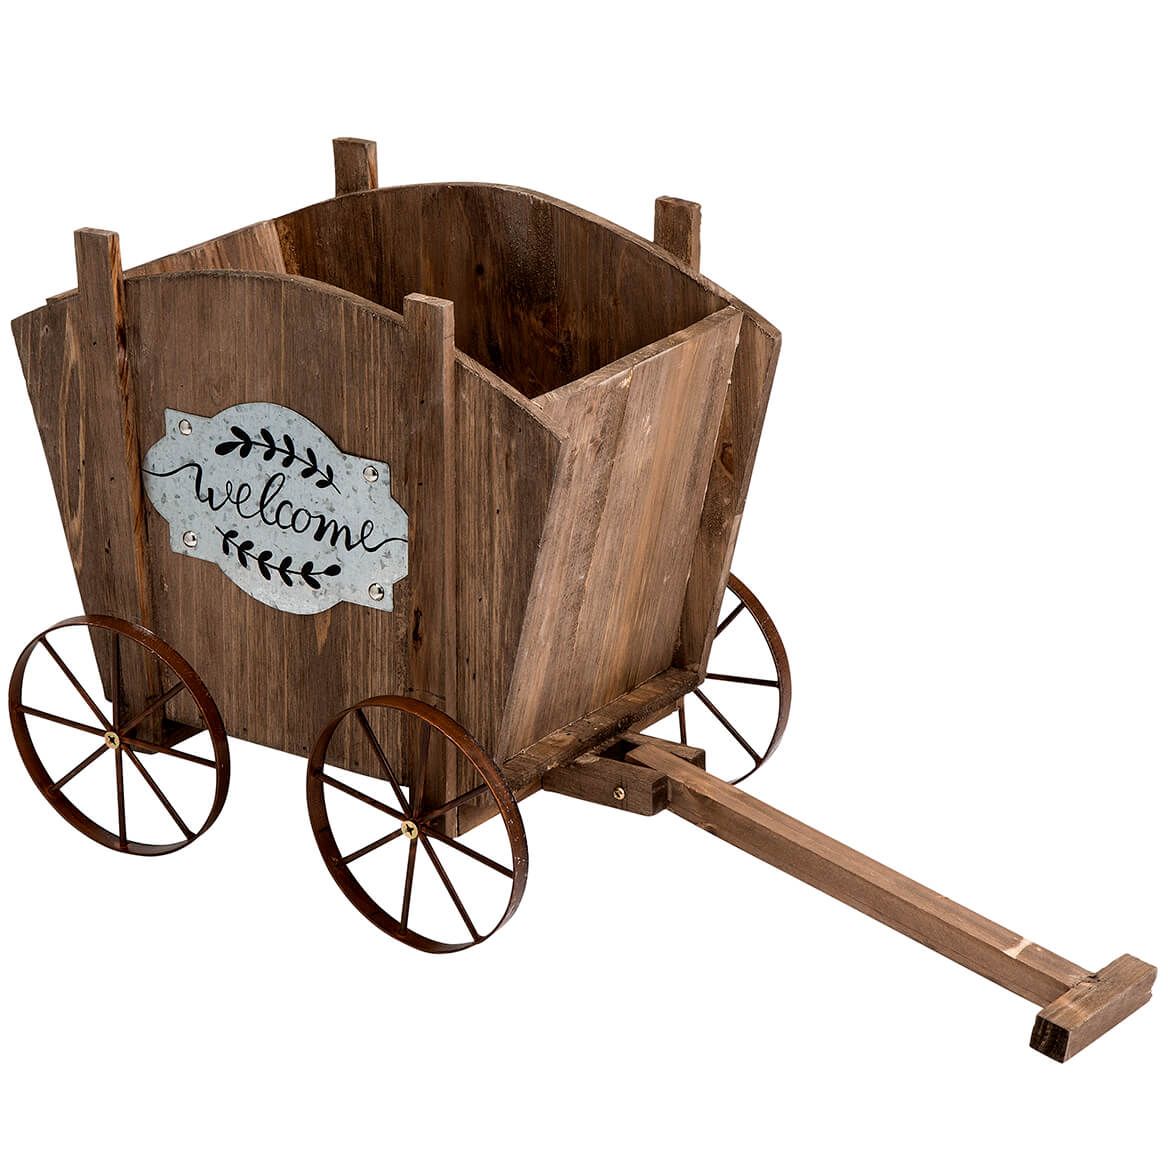 Welcome Wagon Wooden Planter Box + '-' + 368961